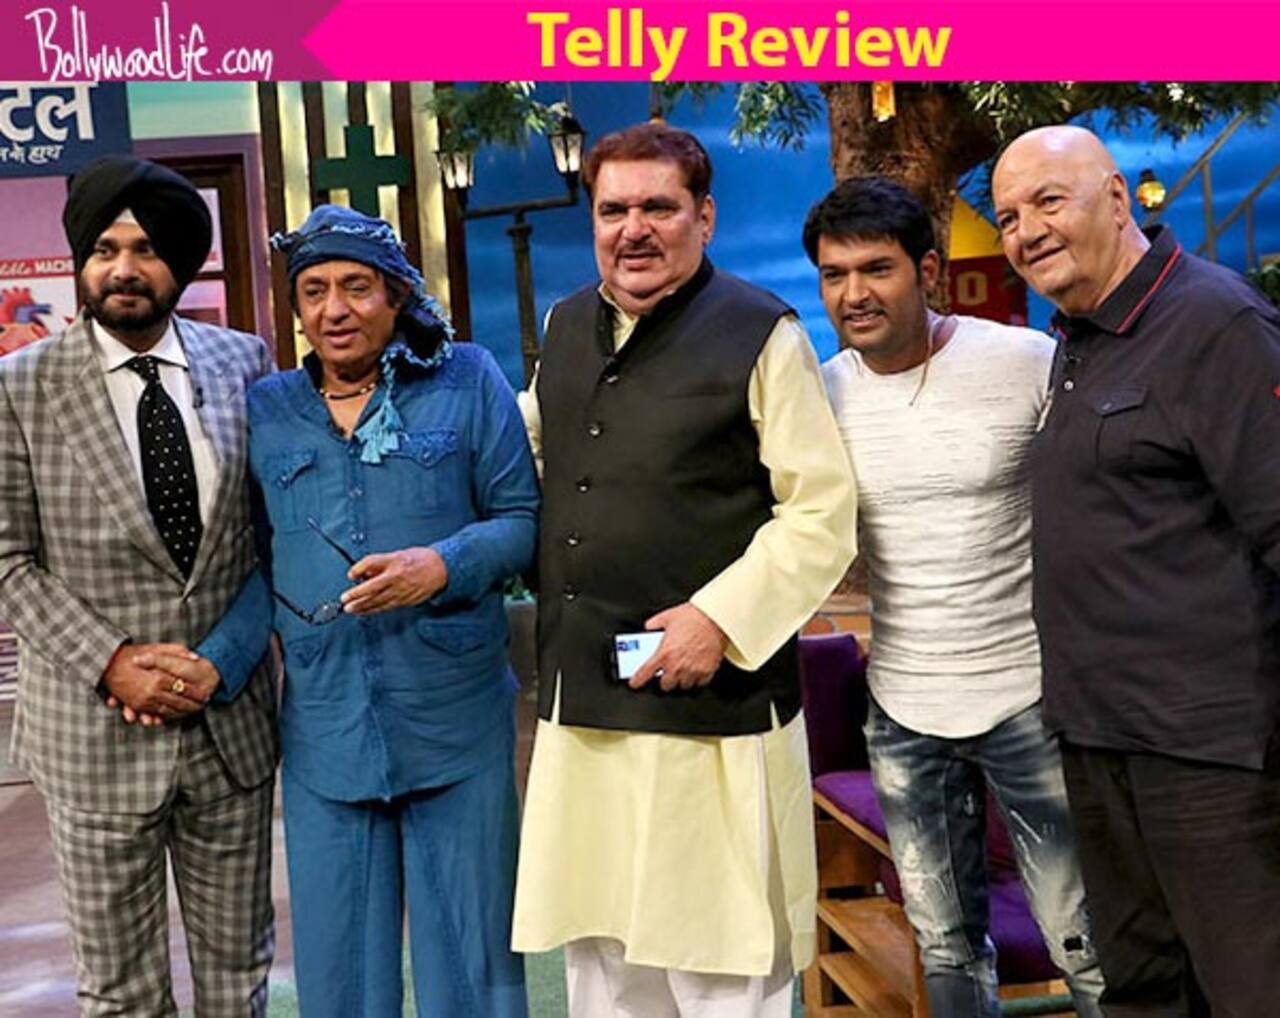 The Kapil Sharma Show: Ranjeet, Prem Chopra and Raza Murad try to make the  episode fun but sadly it wasn't - Bollywood News & Gossip, Movie Reviews,  Trailers & Videos at 